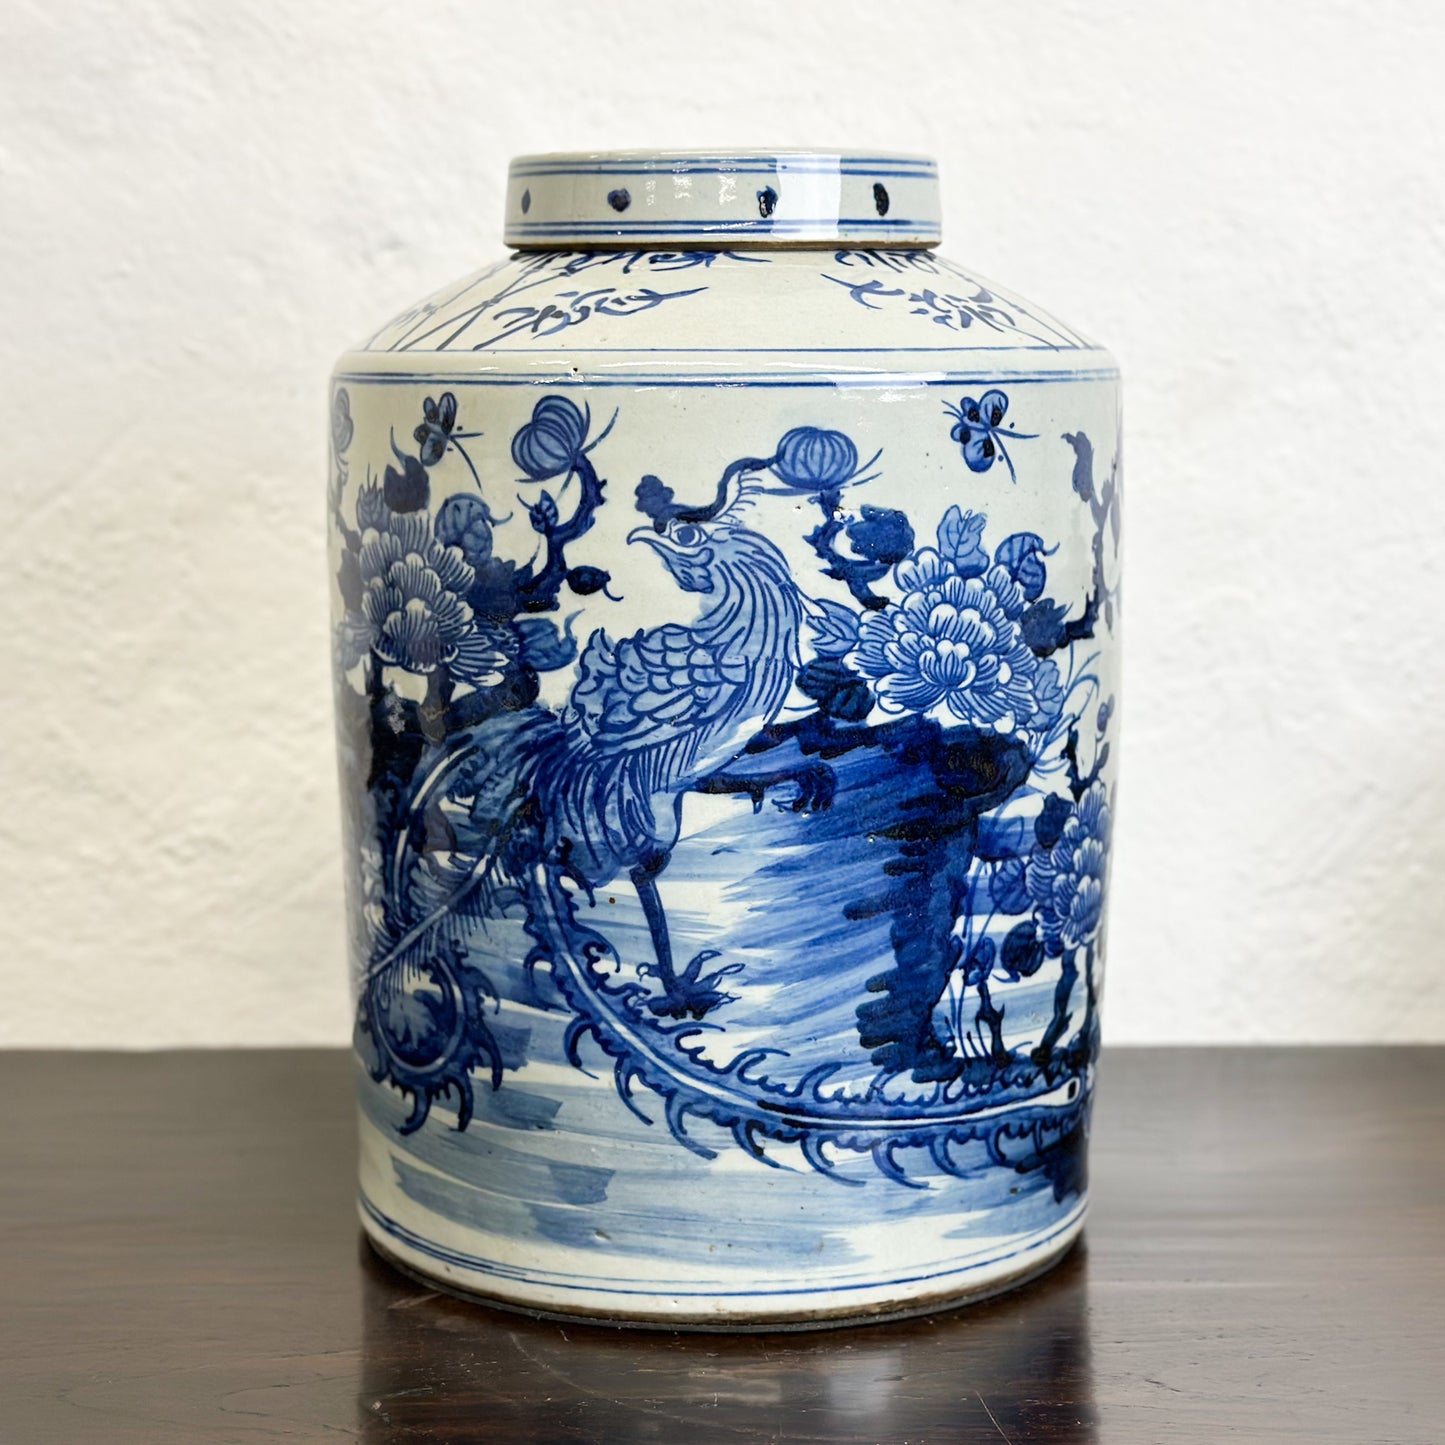 Chinese-Blue-and-White-Porcelain-Cylindrical-Container-Jar-Phoenix-and-Flowers3